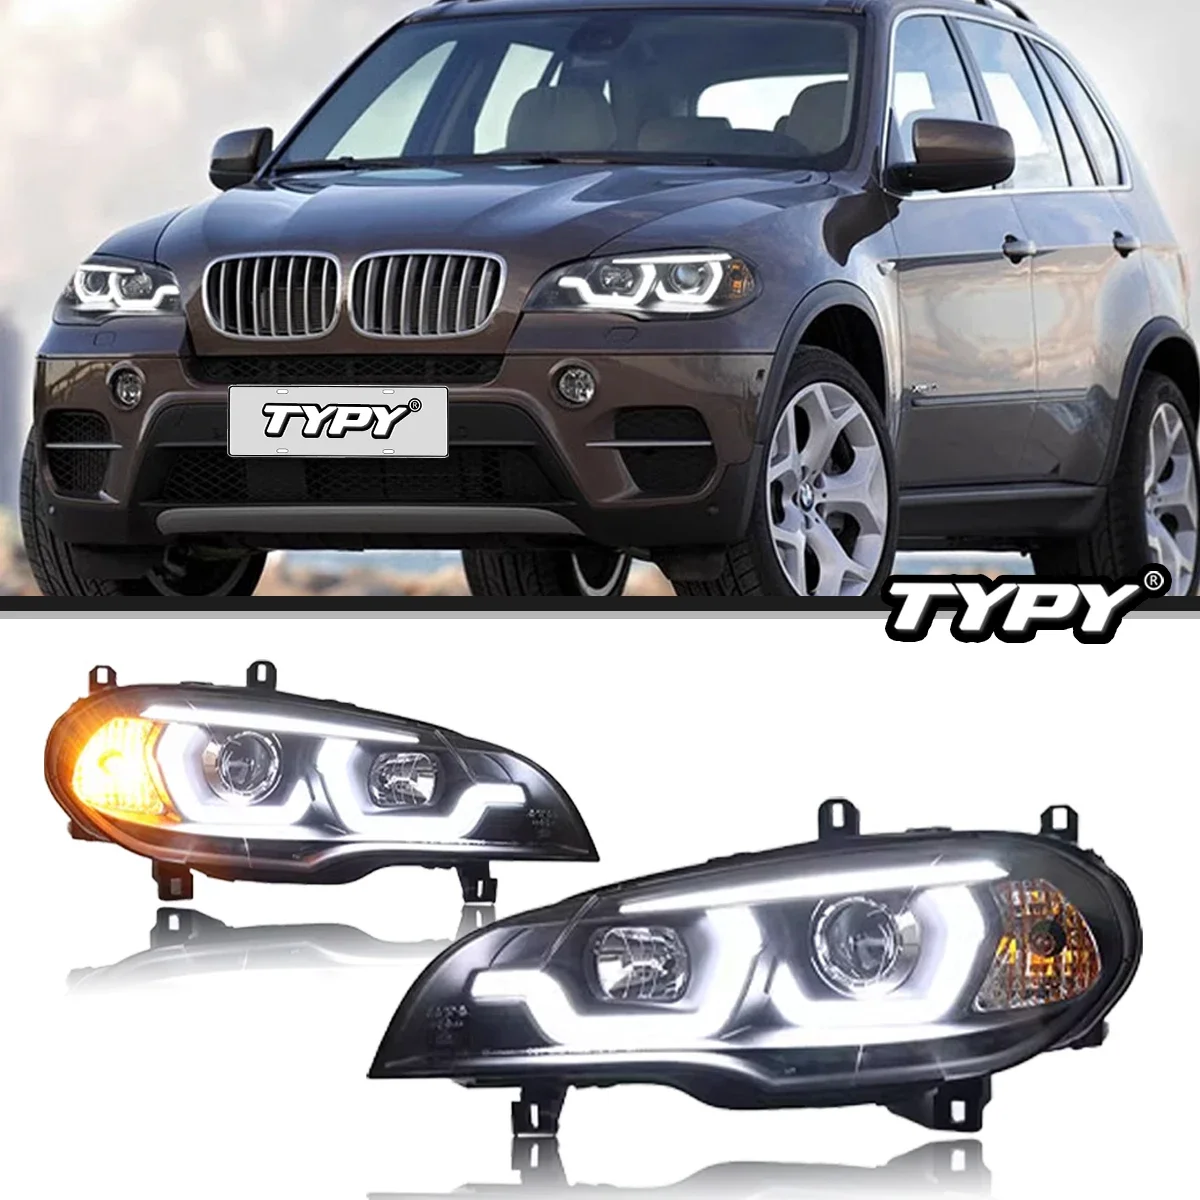 

TYPY Car Headlights For BMW X5 E70 2007-2013 LED Car Lamps Daytime Running Lights Dynamic Turn Signals Car Accessories